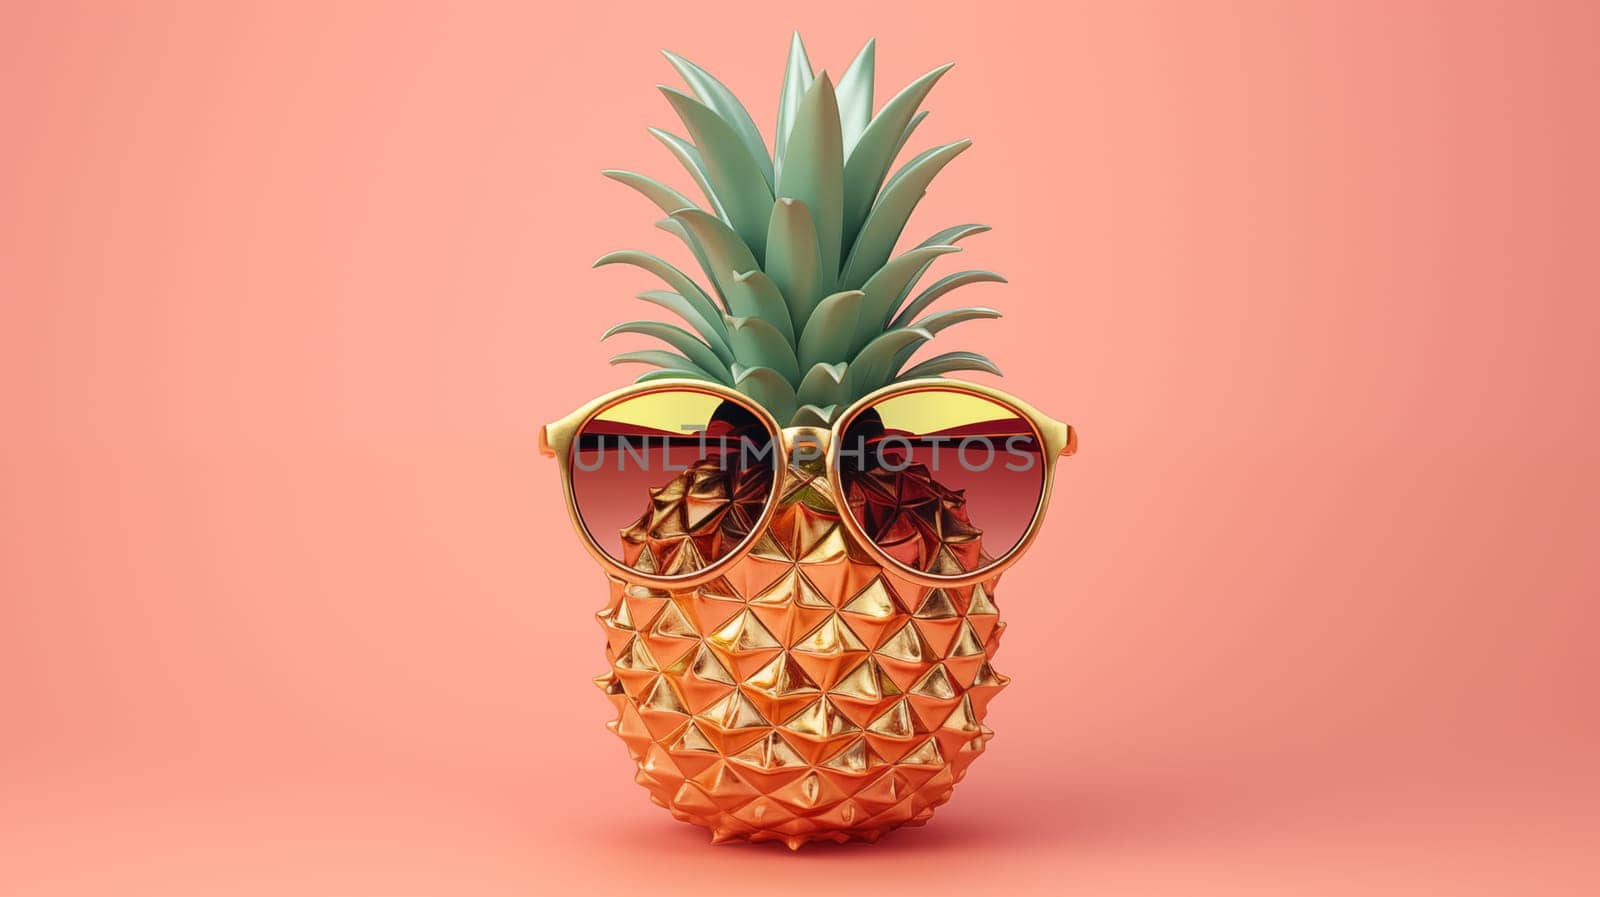 A beautiful pineapple stands against a peach-colored background in gold sunglasses by Zakharova